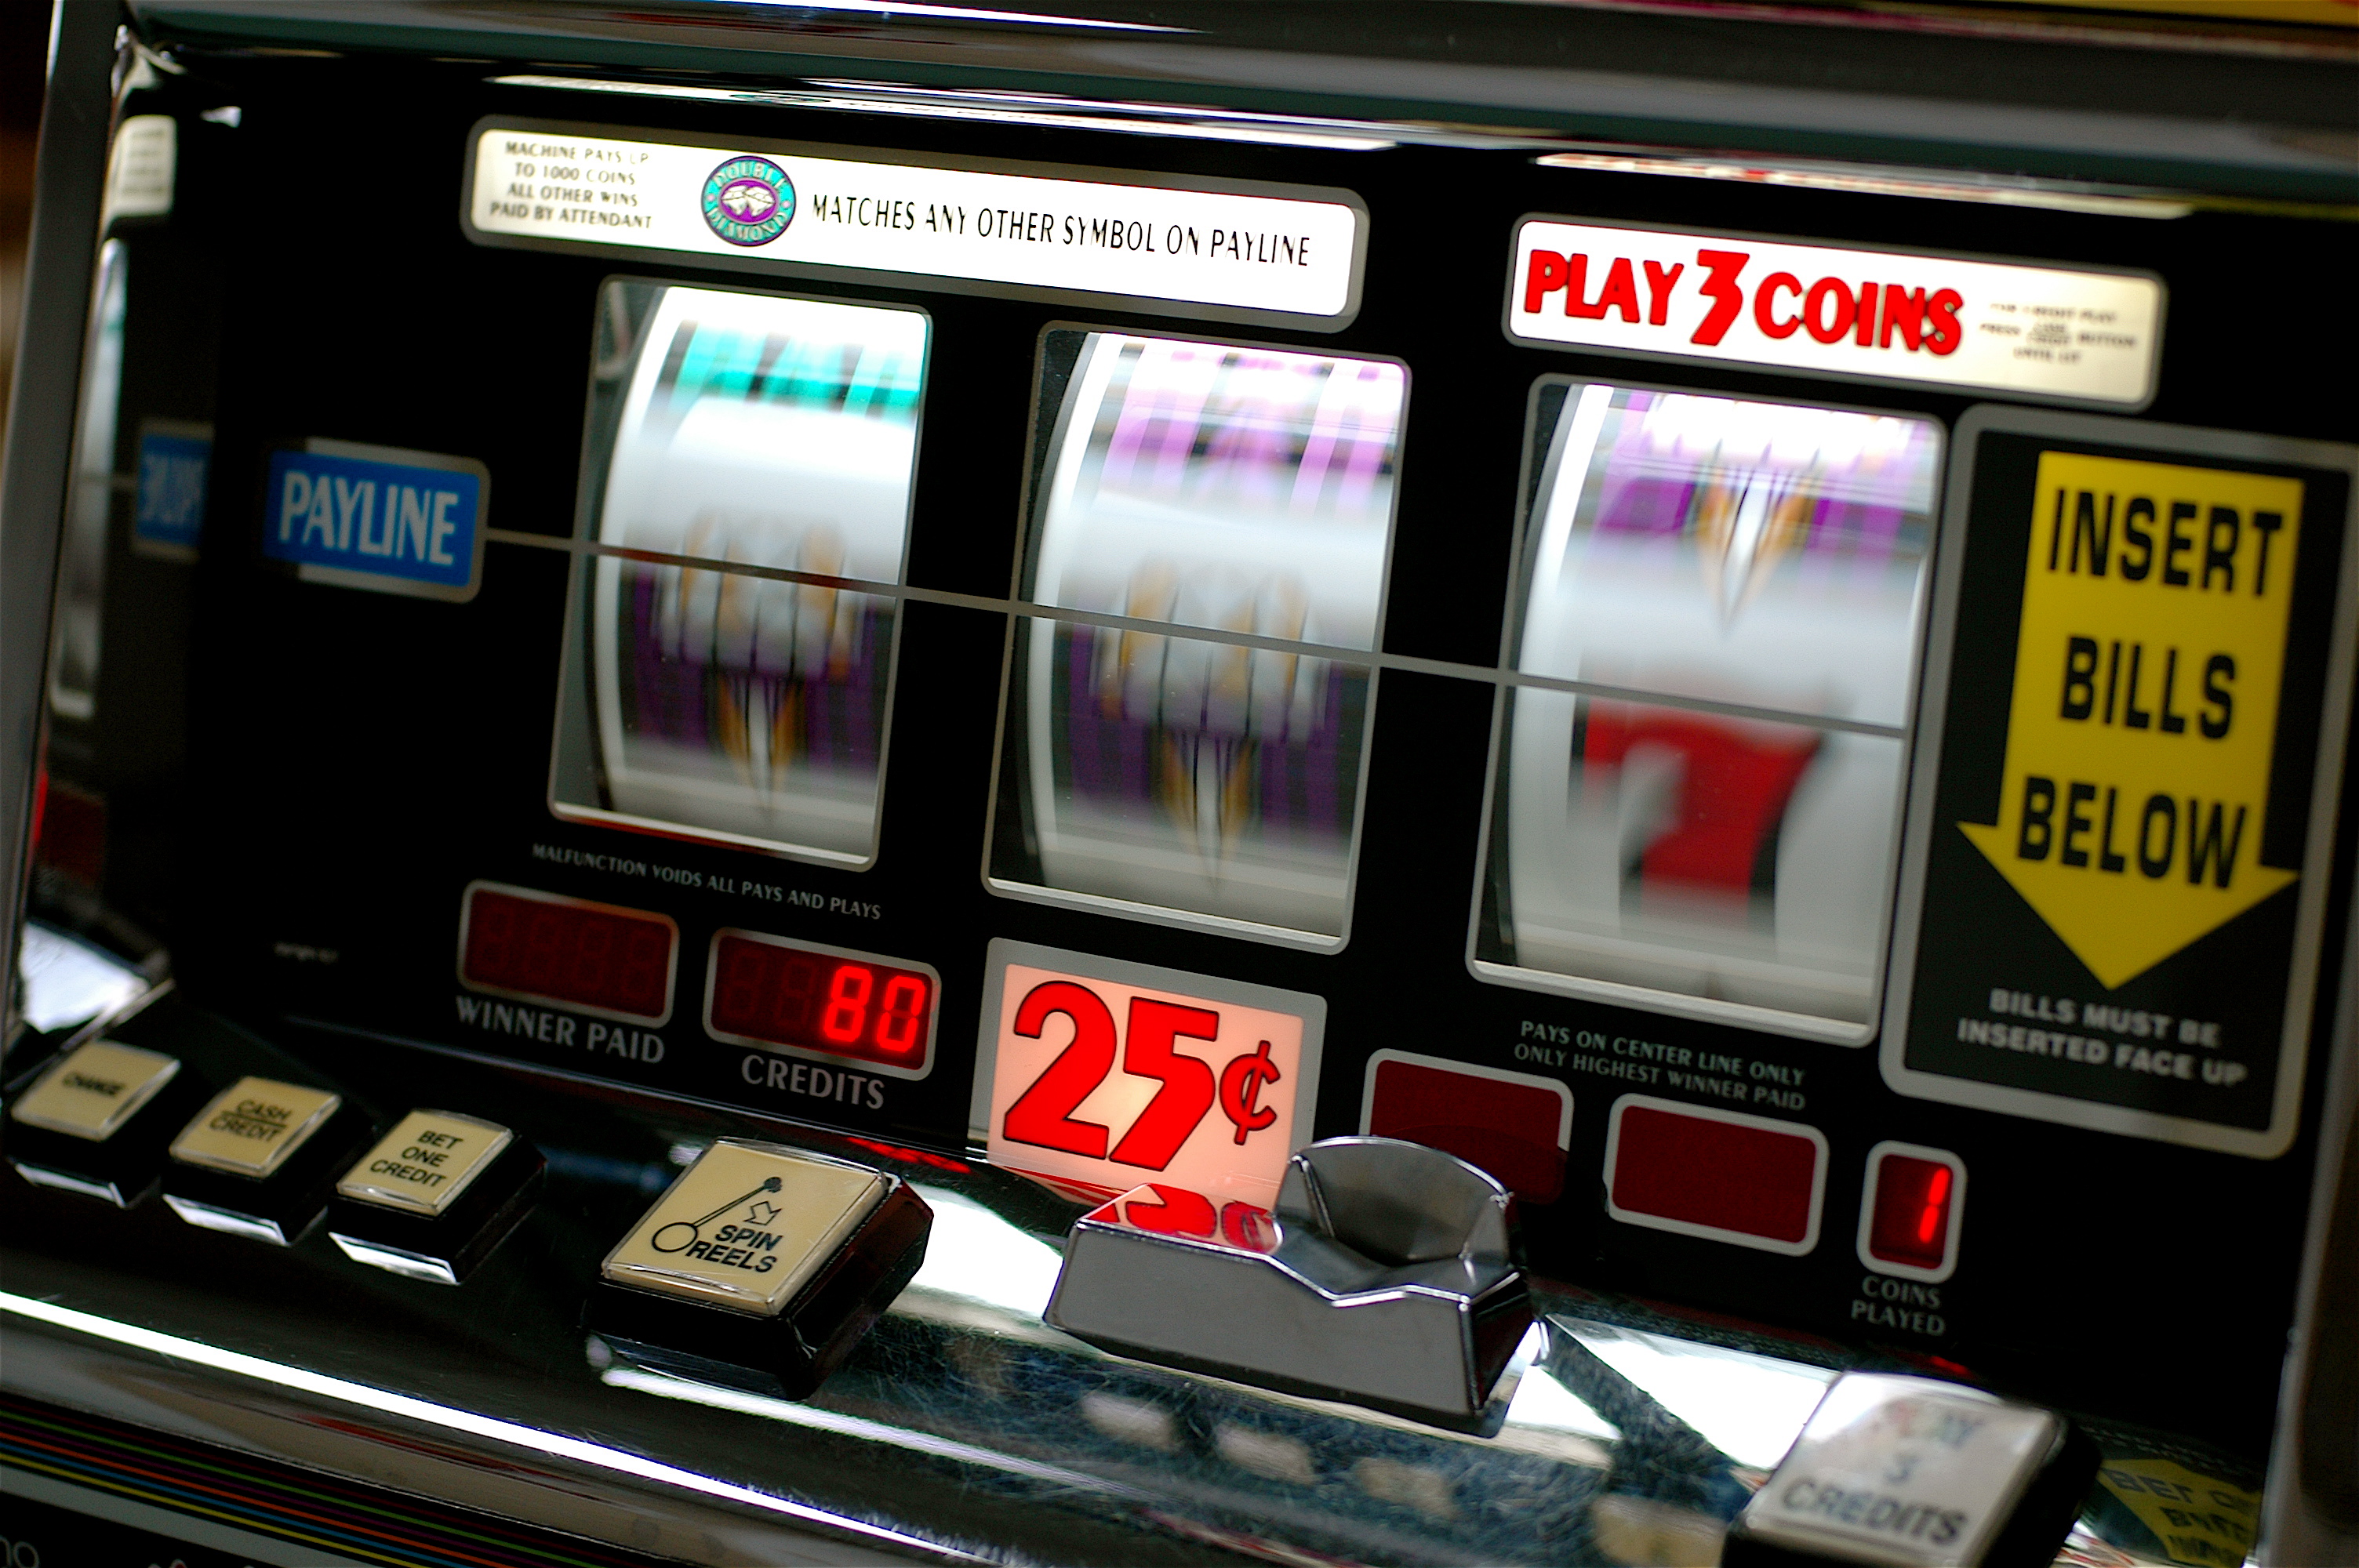 How to win at poker slot machines